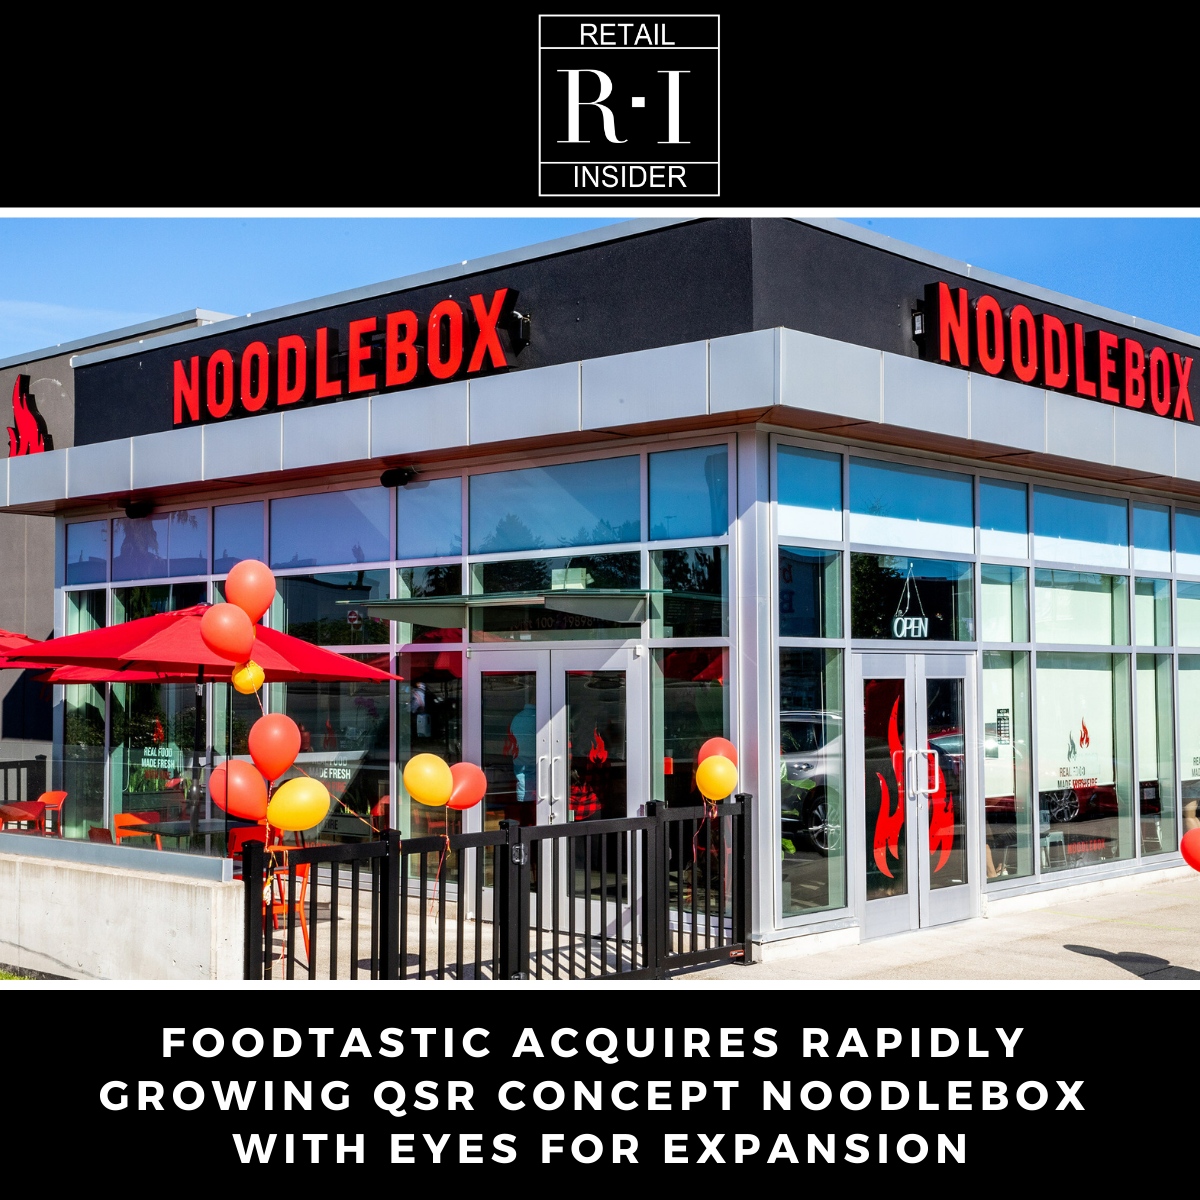 Foodtastic Acquires Rapidly Growing QSR Concept Noodlebox with Eyes for Expansion

l8r.it/YRfY